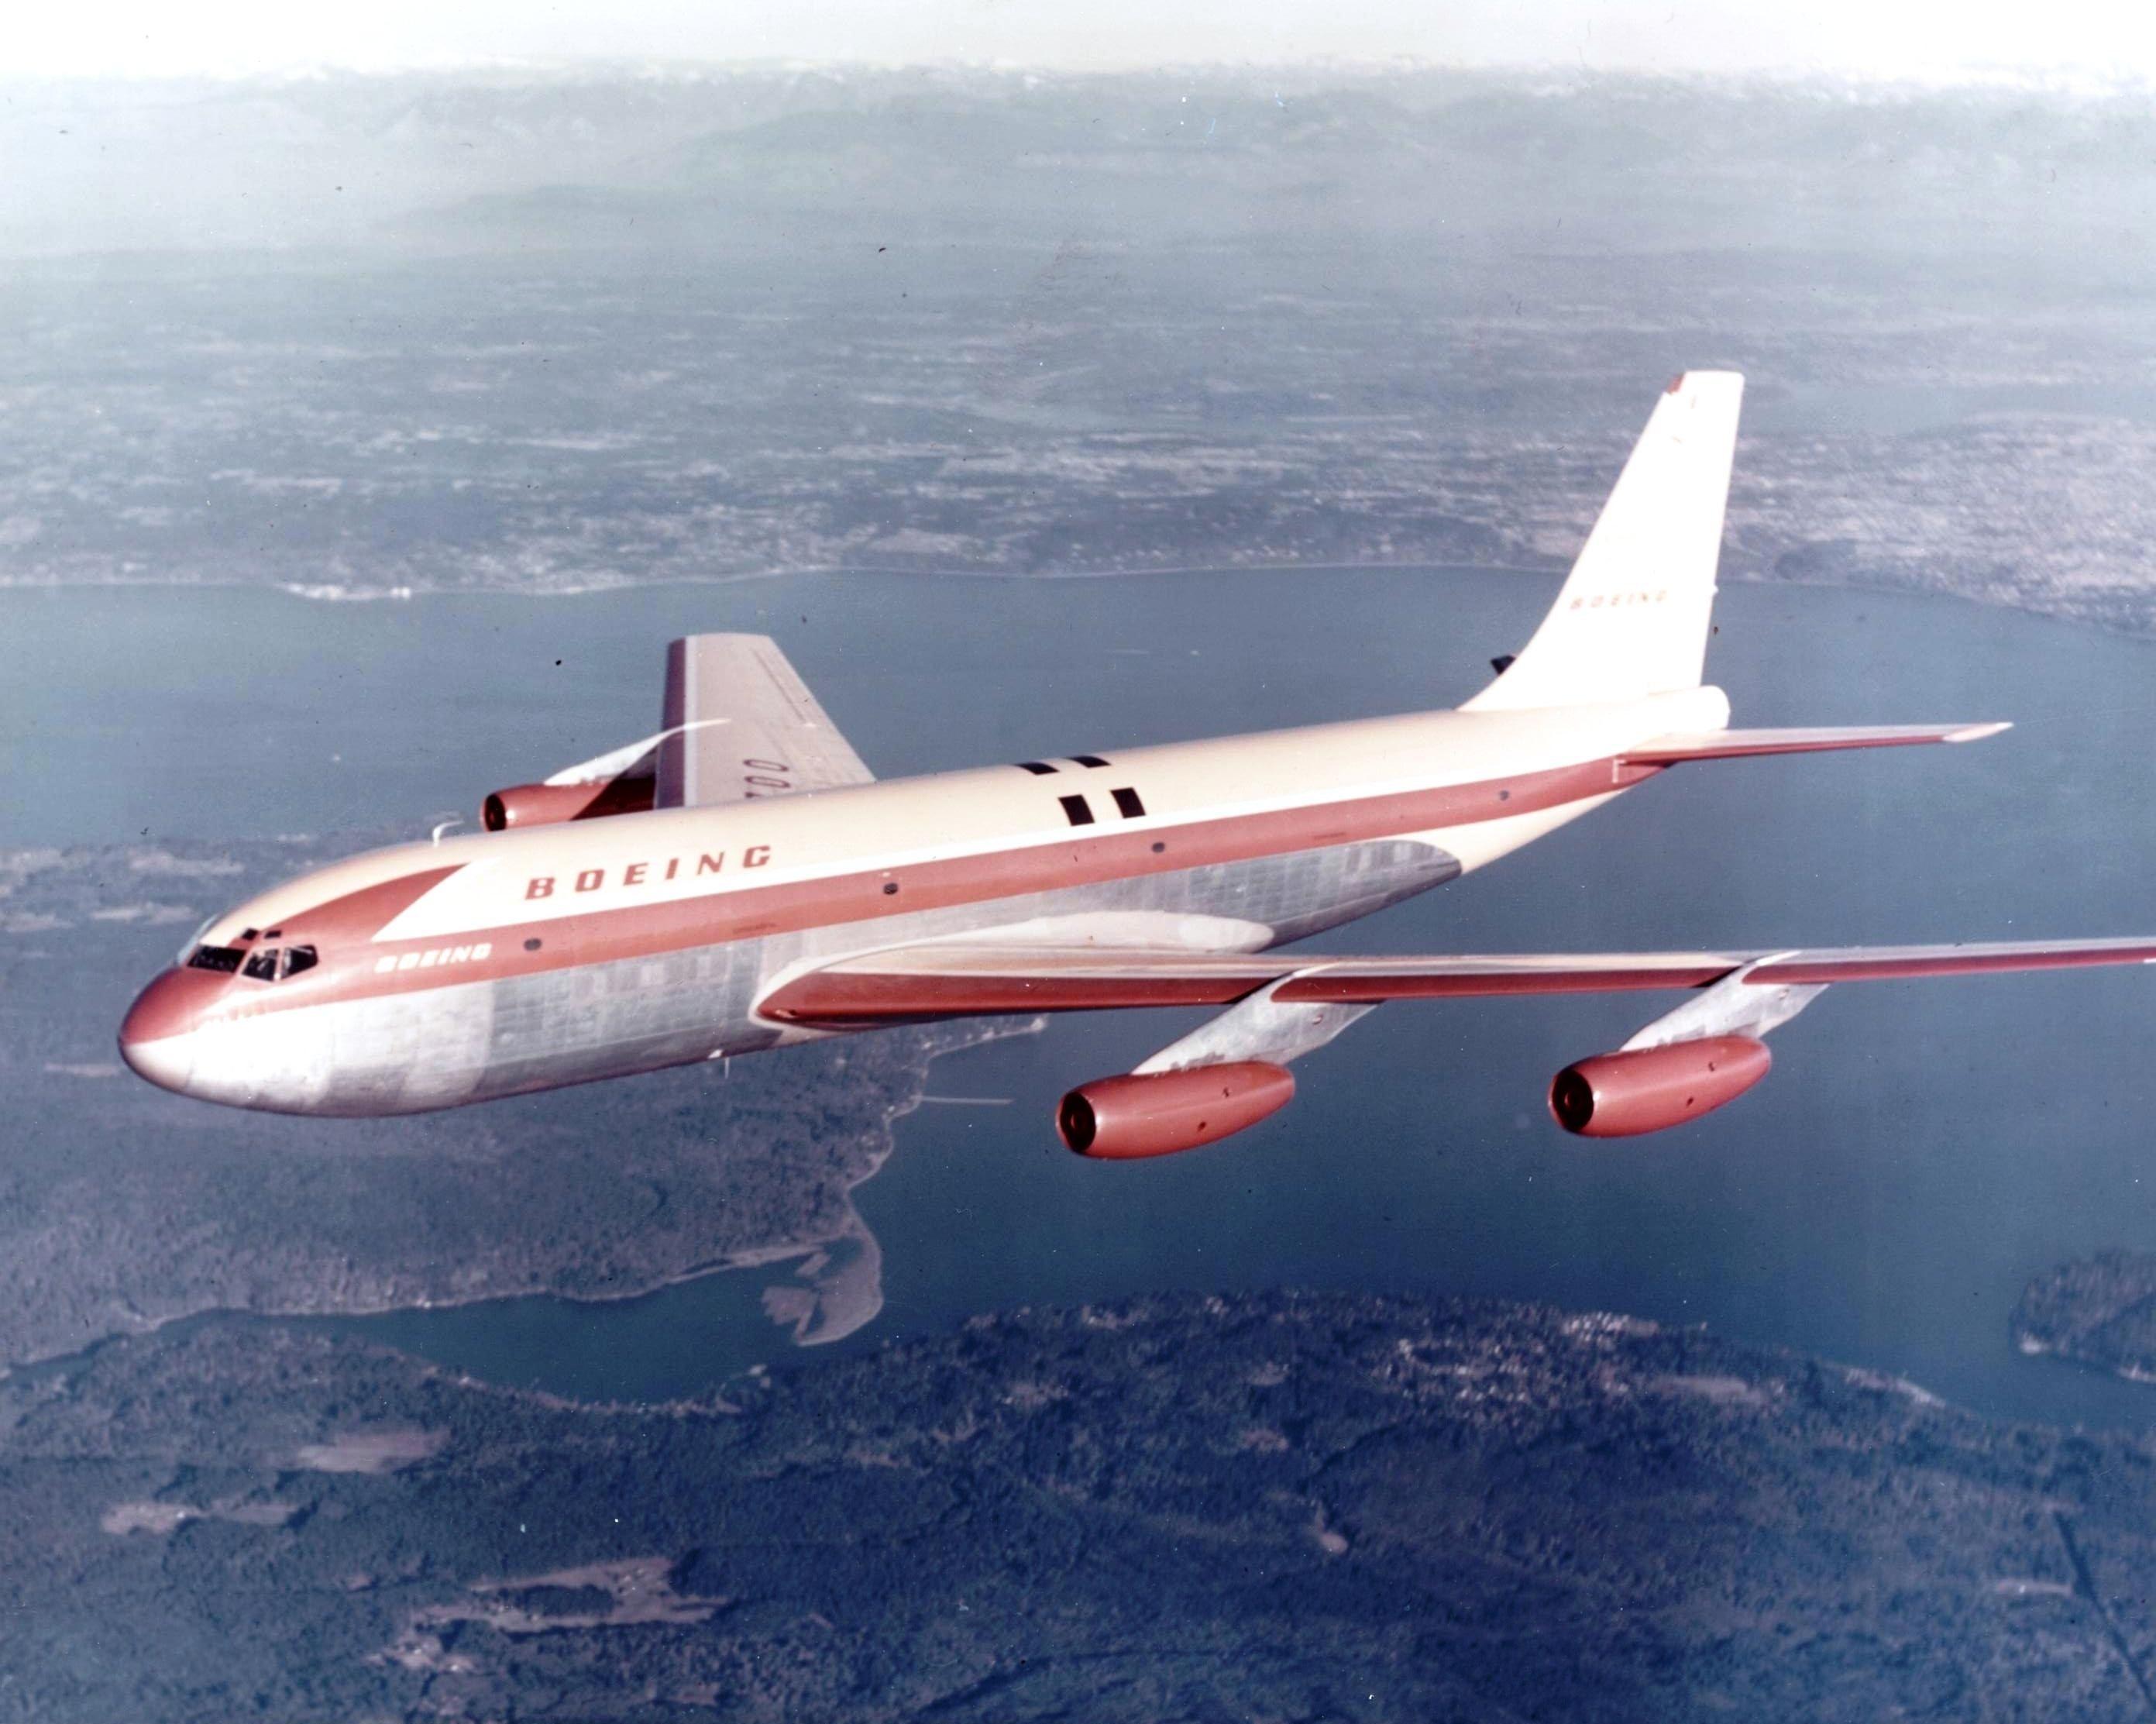 July 1954: Boeing 707 Makes First Flight